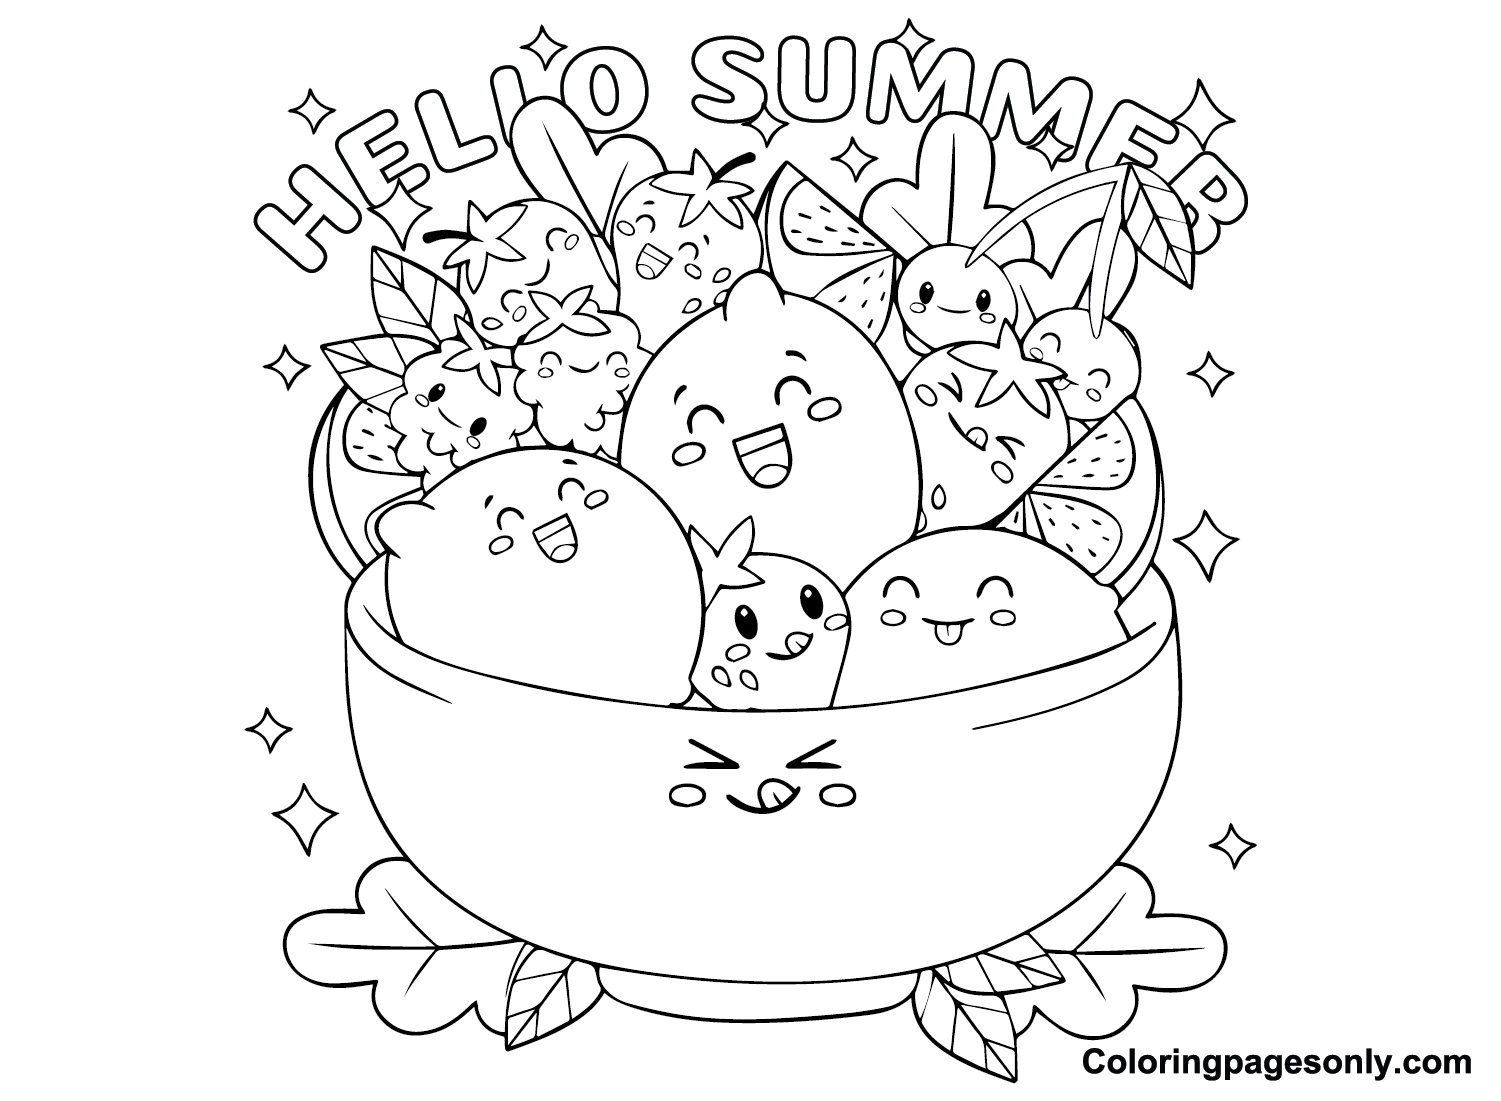 June Summers Coloring Page